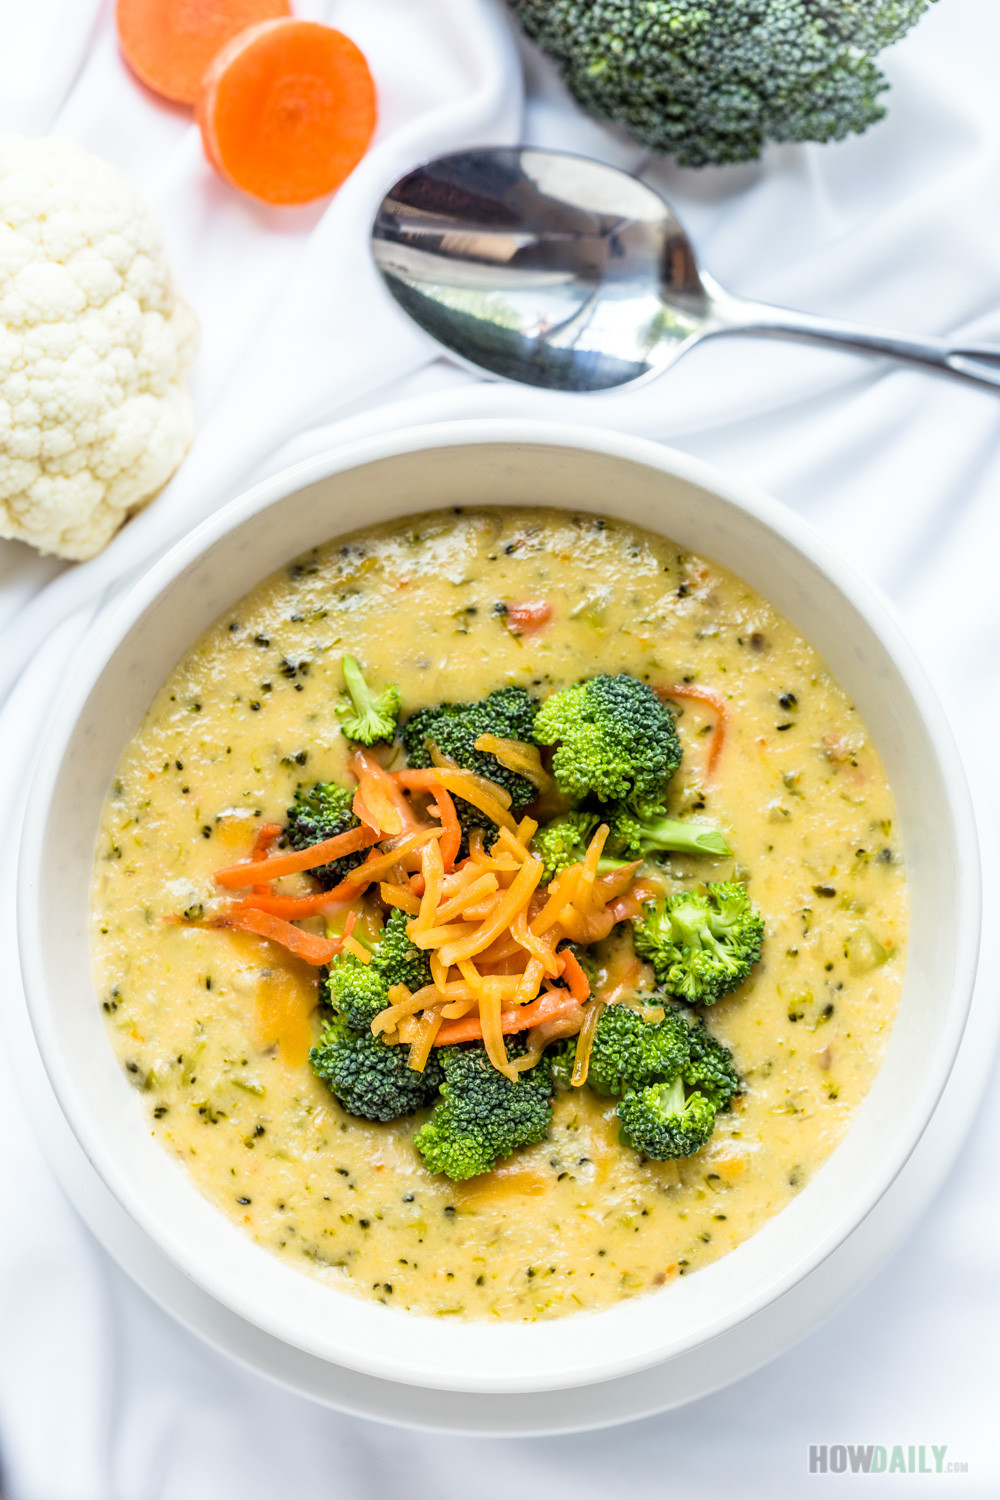 Low Carb Broccoli Cheese Soup
 Low Carb Broccoli Cheese Soup Recipe Healthy Diet with